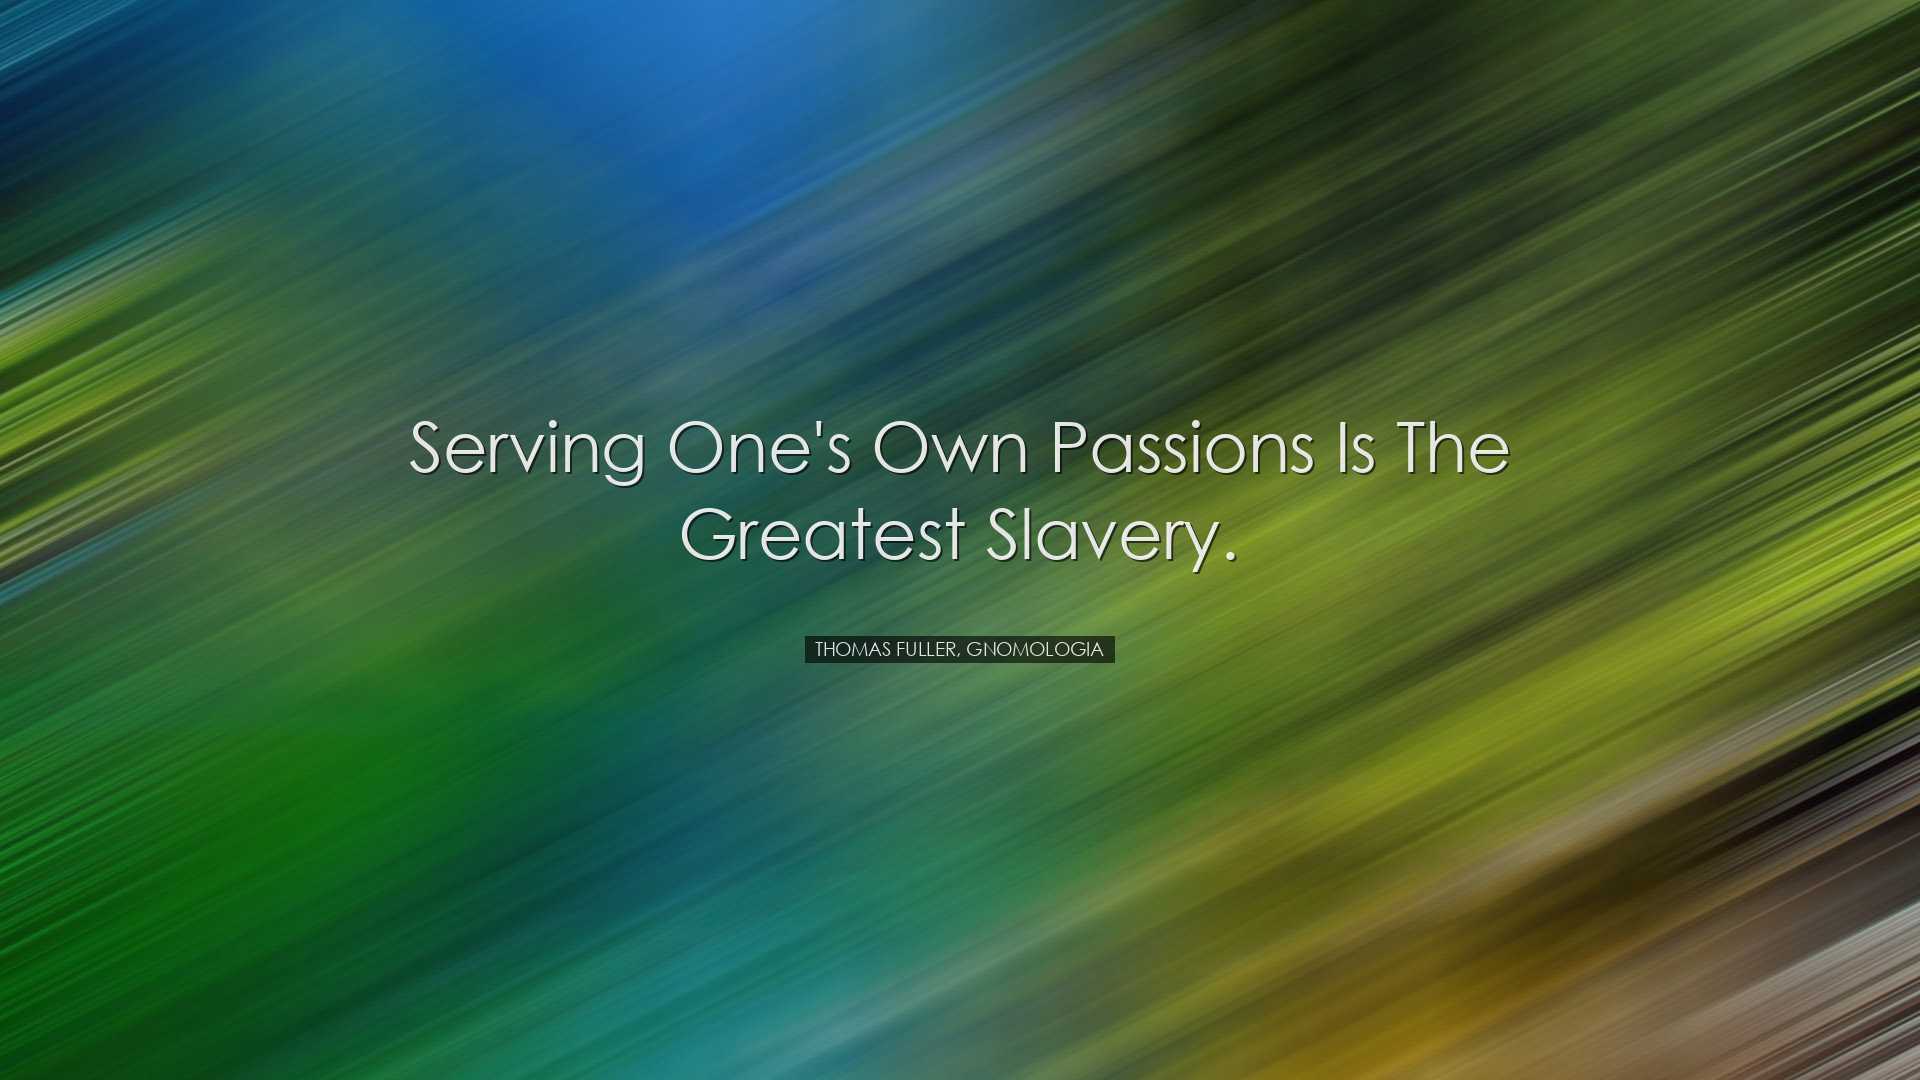 Serving one's own passions is the greatest slavery. - Thomas Fulle